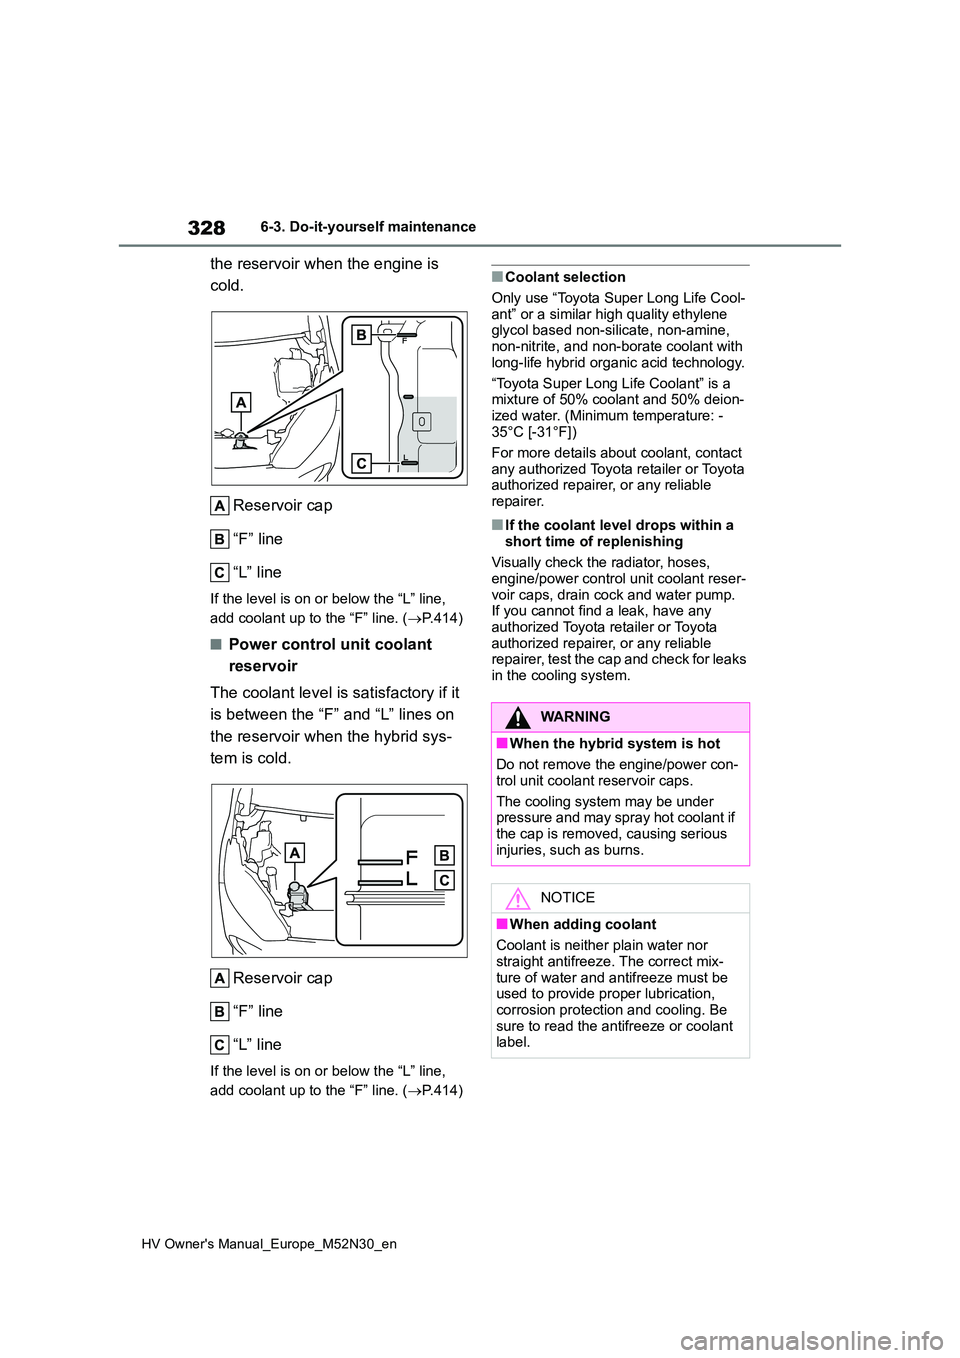 TOYOTA YARIS 2022  Owners Manual 328
HV Owner's Manual_Europe_M52N30_en
6-3. Do-it-yourself maintenance
the reservoir when the engine is  
cold. 
Reservoir cap 
“F” line 
“L” line
If the level is on or below the “L” l